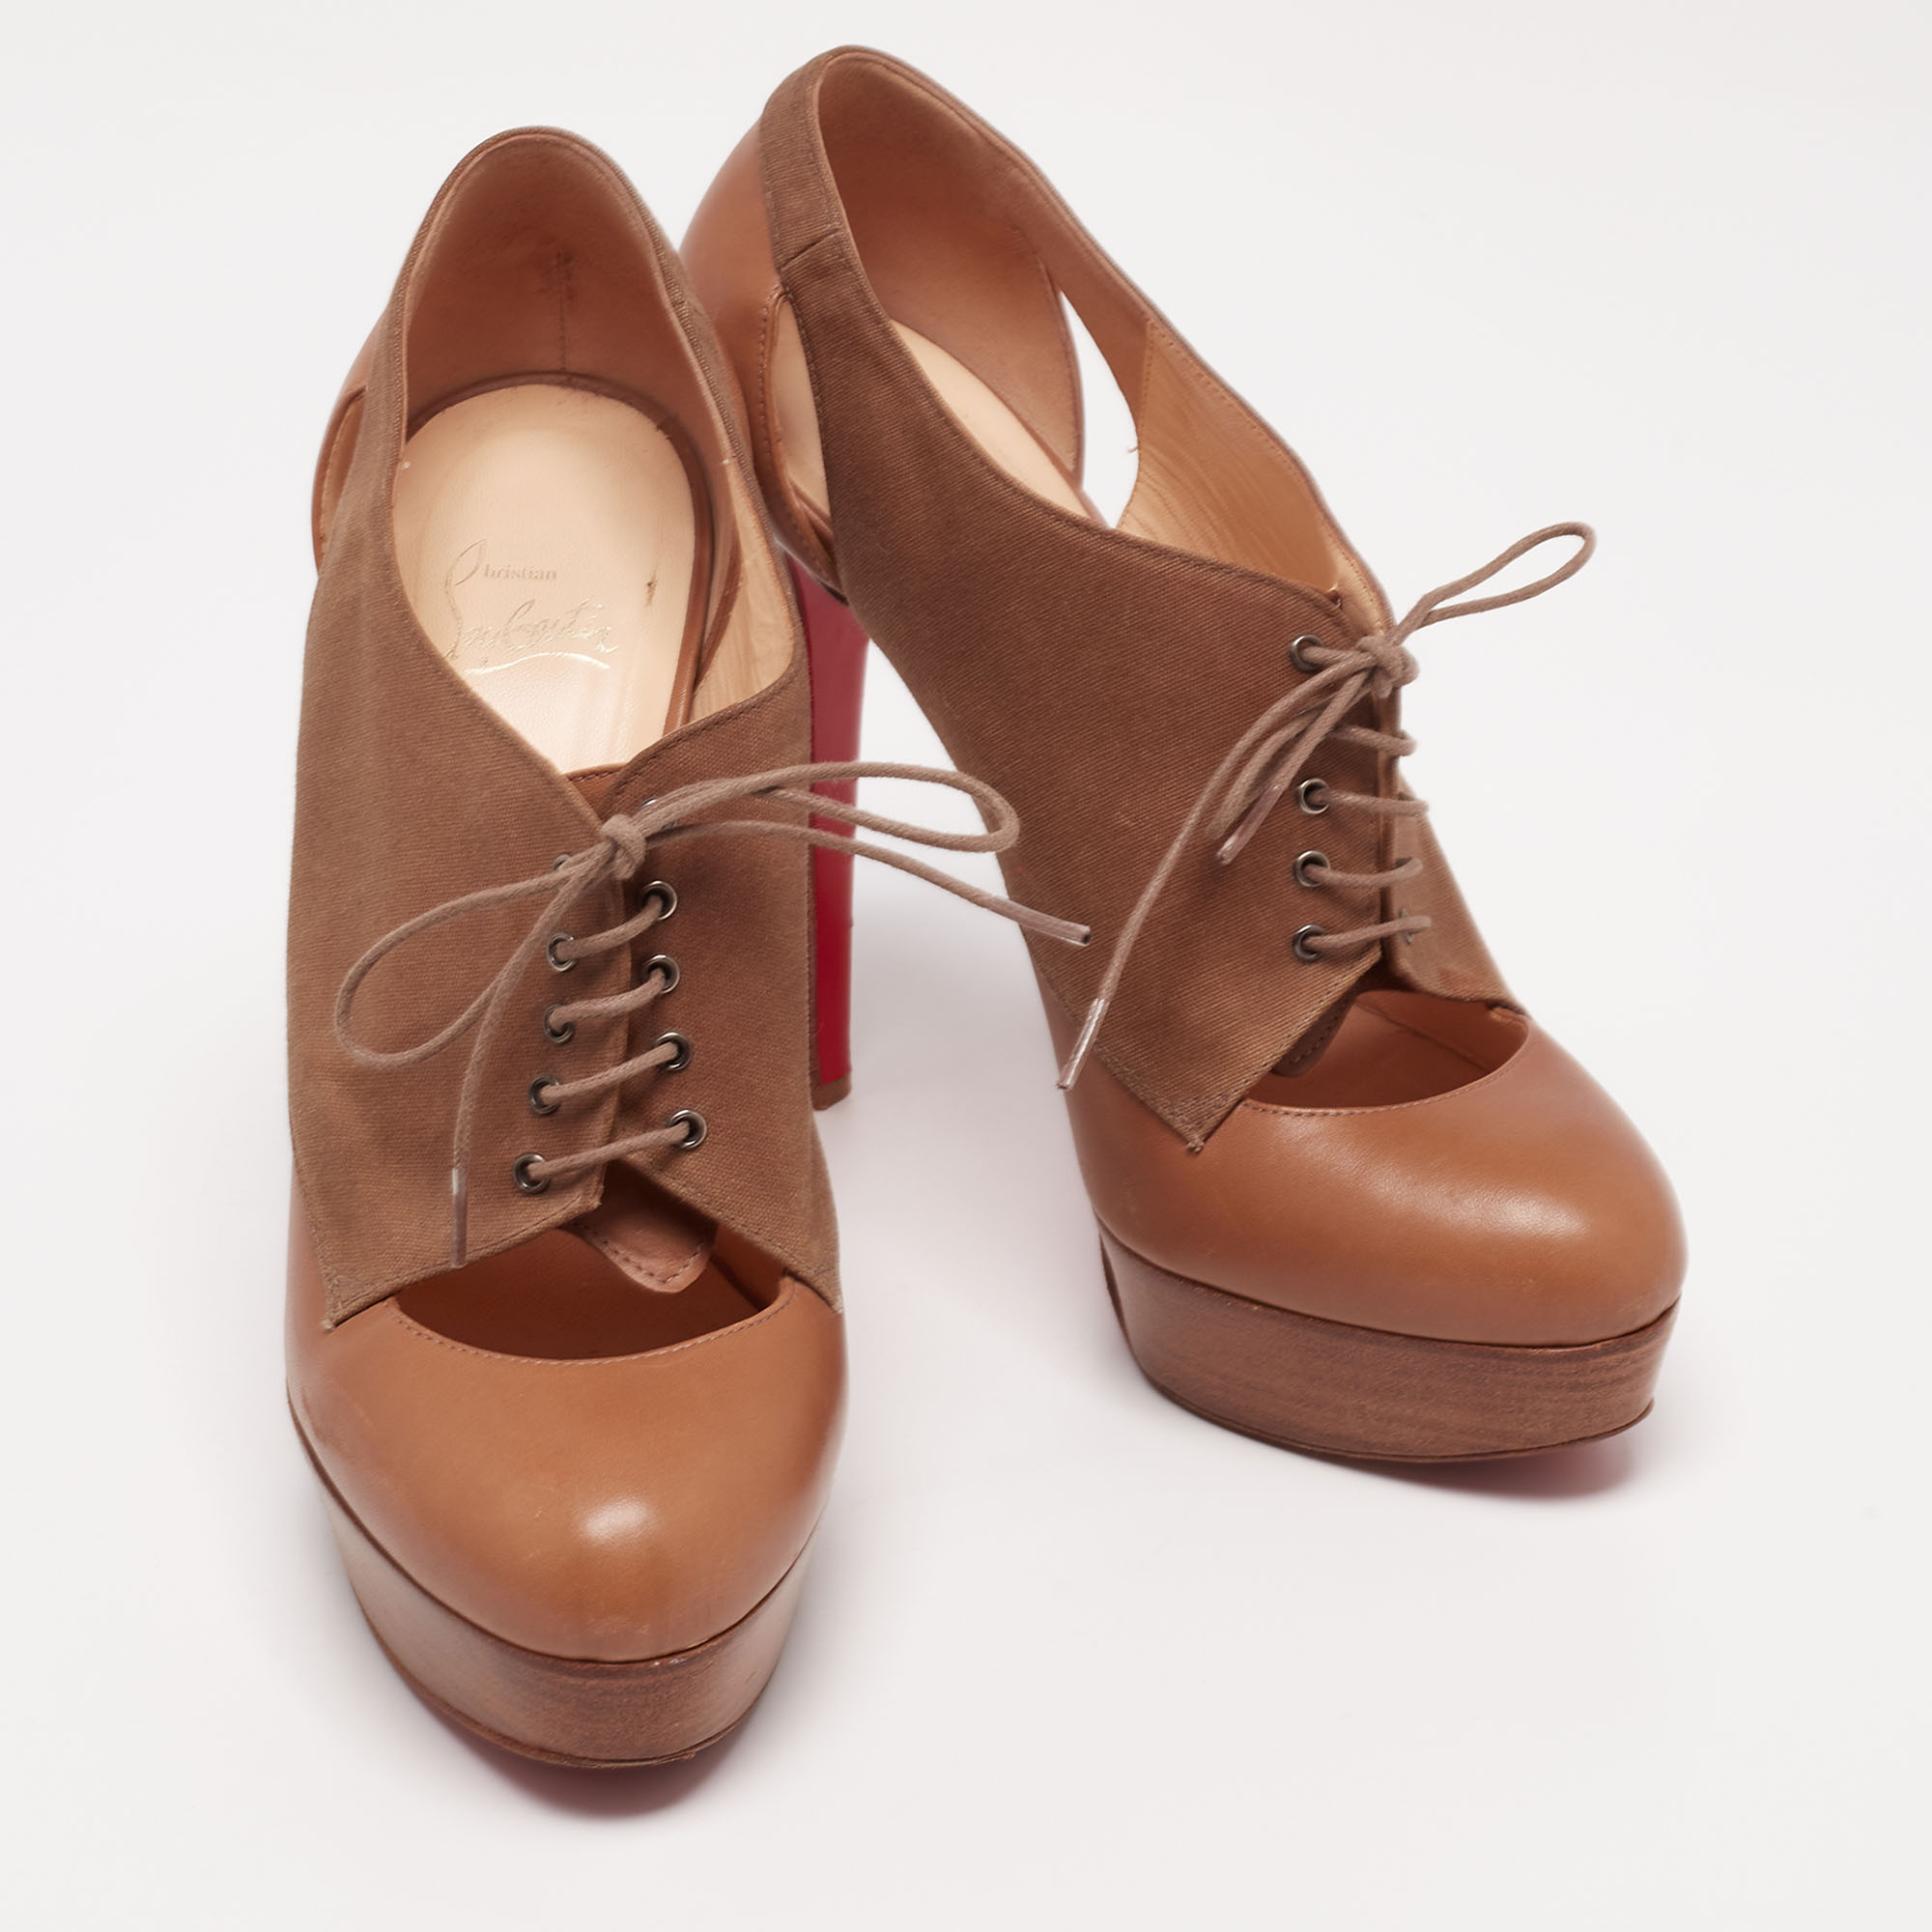 Christian Louboutin Tan/Brown Leather And Canvas Lace-Up Ankle Booties Size 39.5